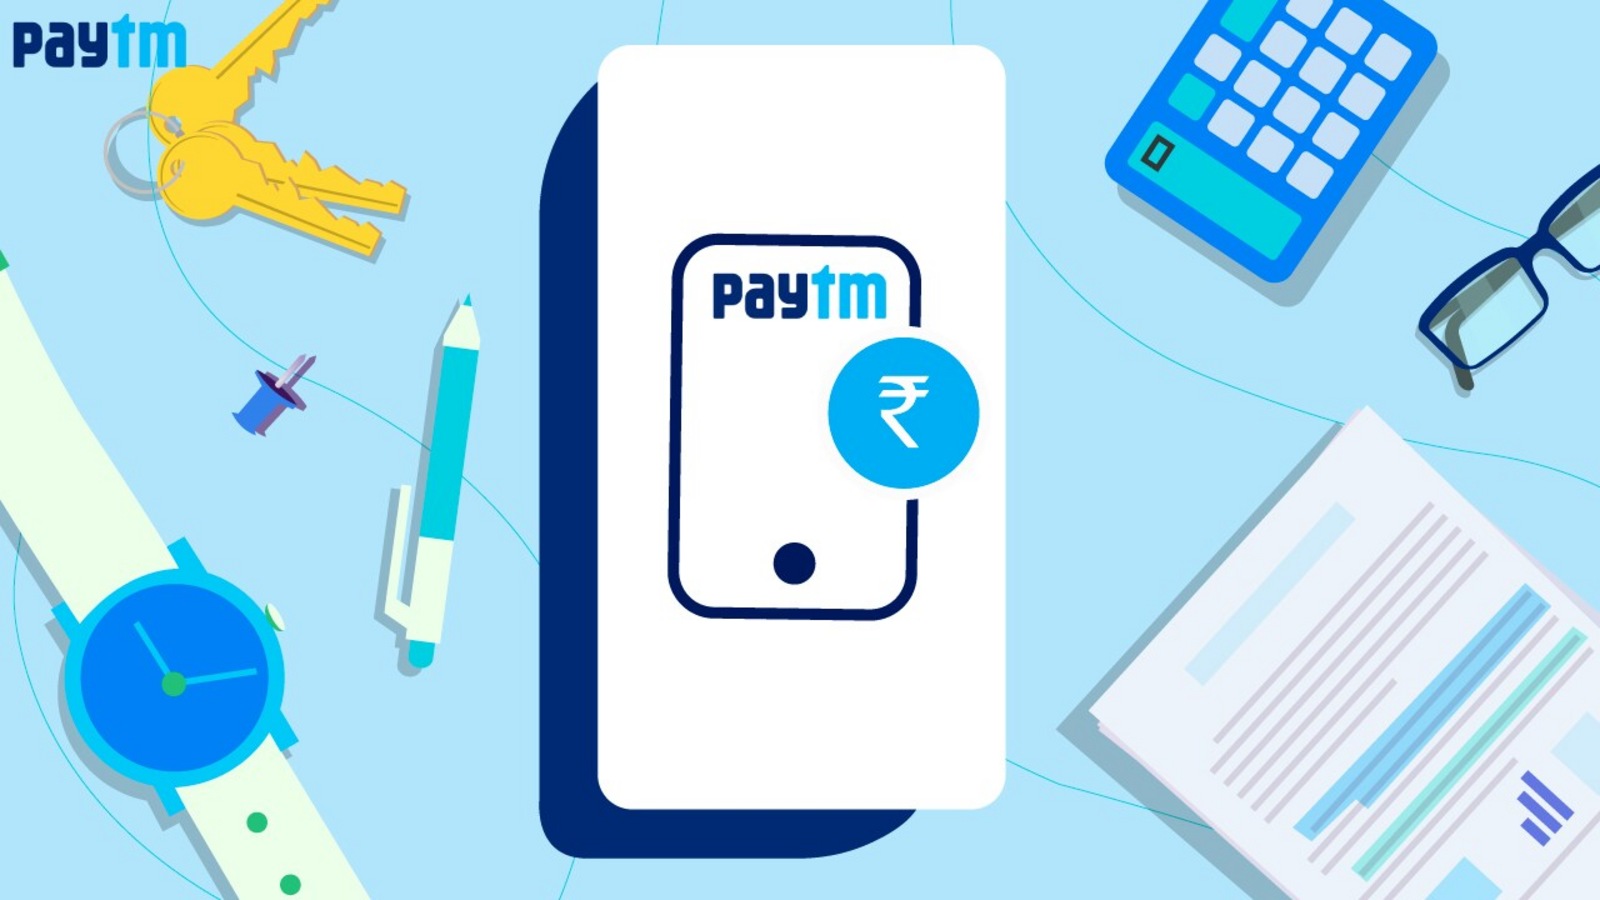 paytm-s-pioneership-in-payments-makes-it-a-favourite-of-indians